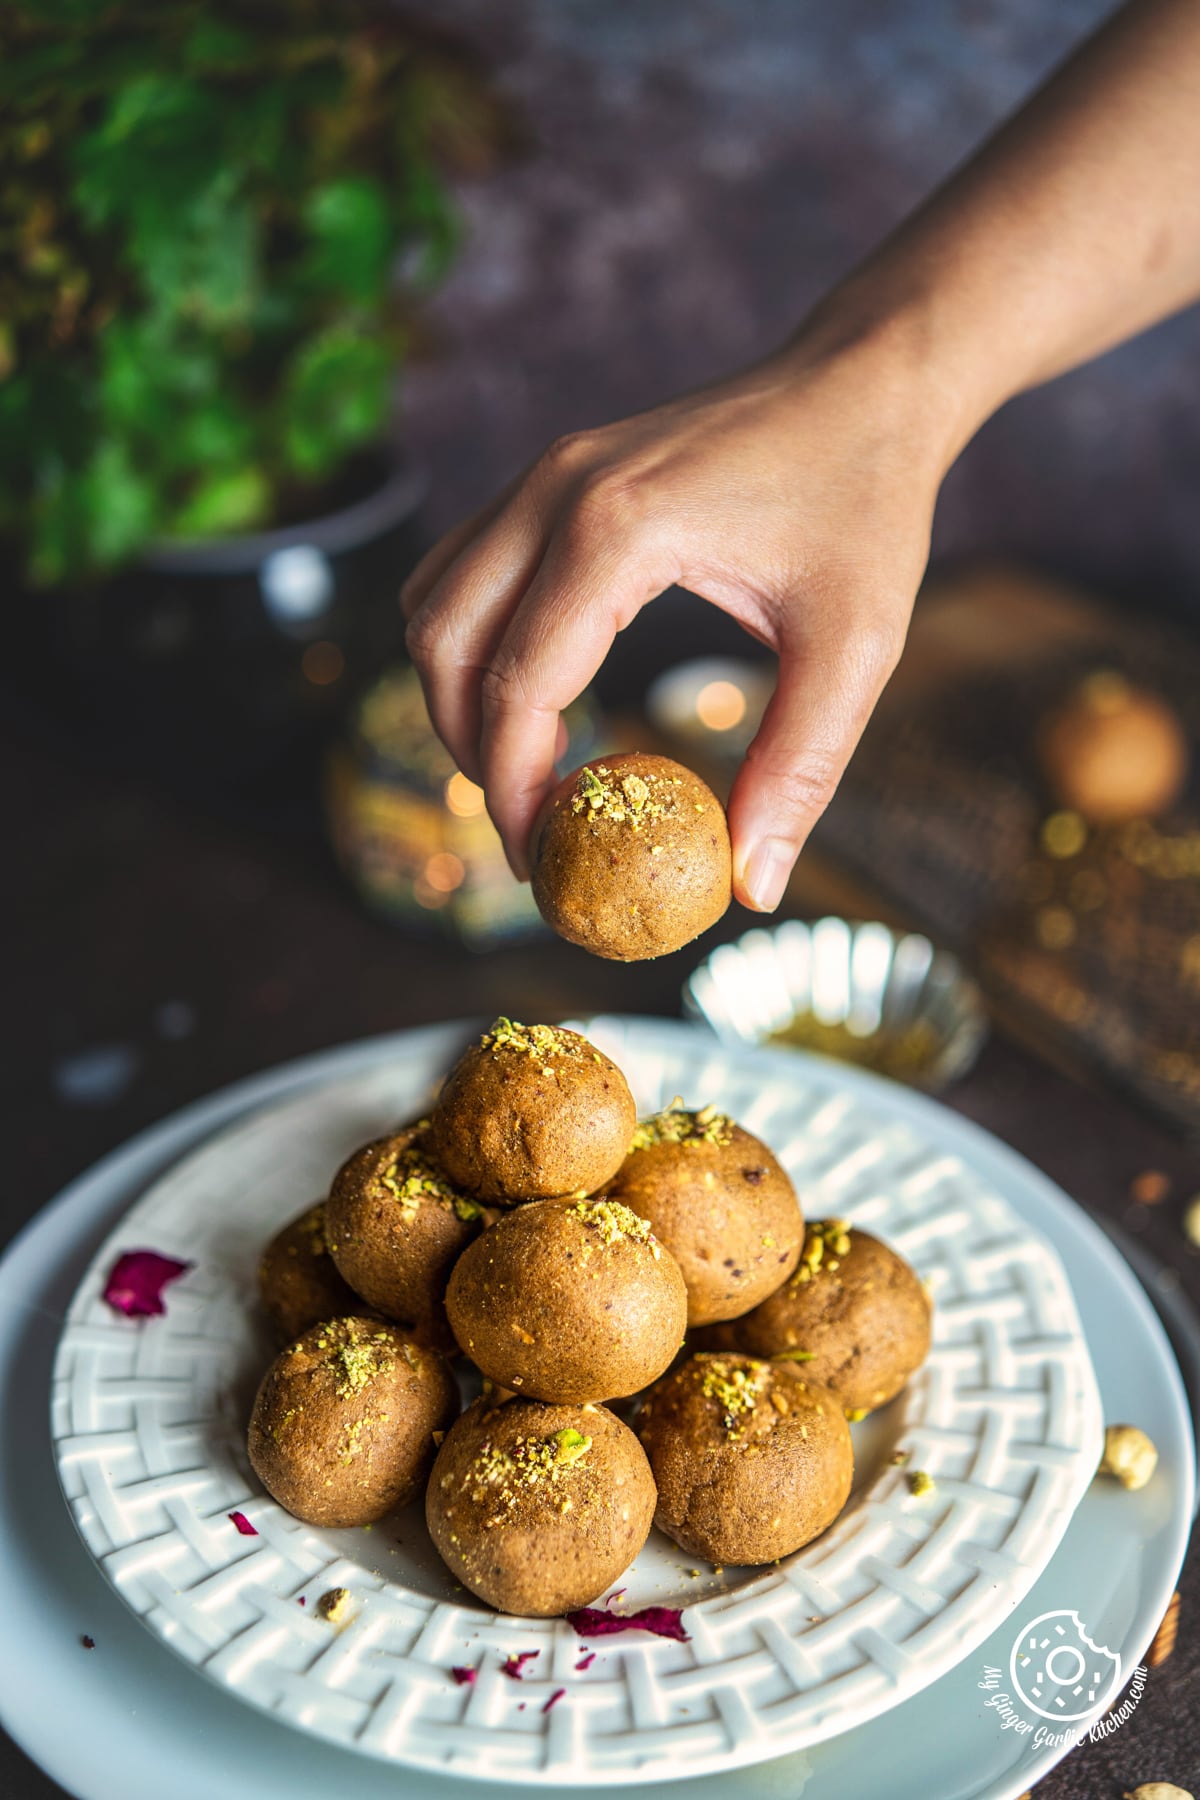 a hand picking one atta ladoo from the white plate stacked with atta ladoos